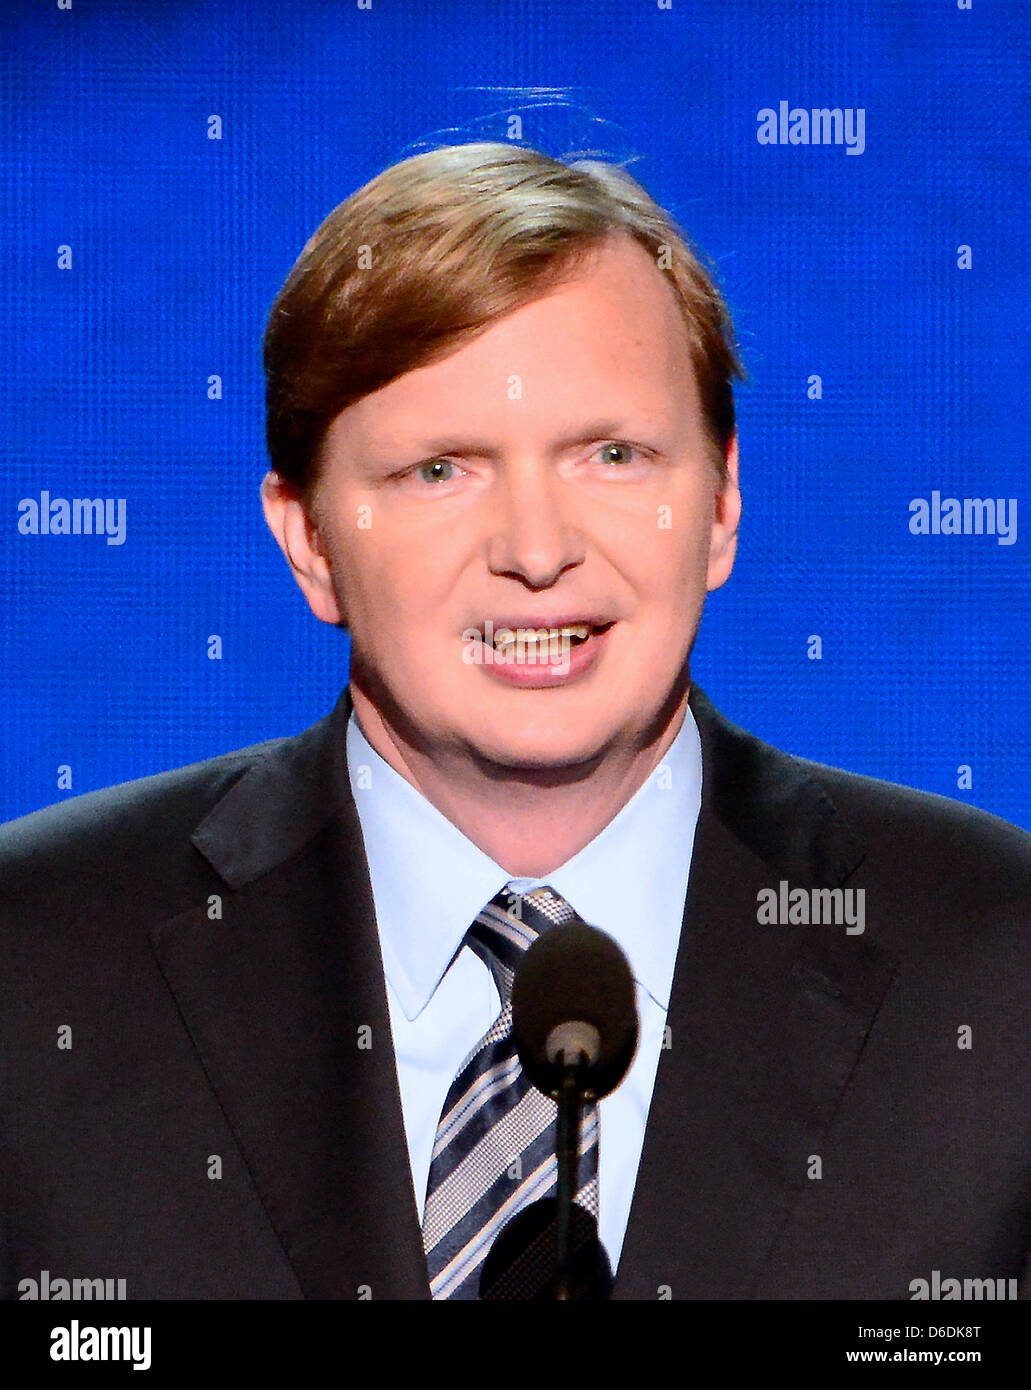 Jim Messina, Campaign Manager, Obama for America, makes remarks at the 2012 Democratic National Convention in Charlotte, North Carolina on Thursday, September 6, 2012. .Credit: Ron Sachs / CNP.(RESTRICTION: NO New York or New Jersey Newspapers or newspapers within a 75 mile radius of New York City) Stock Photo